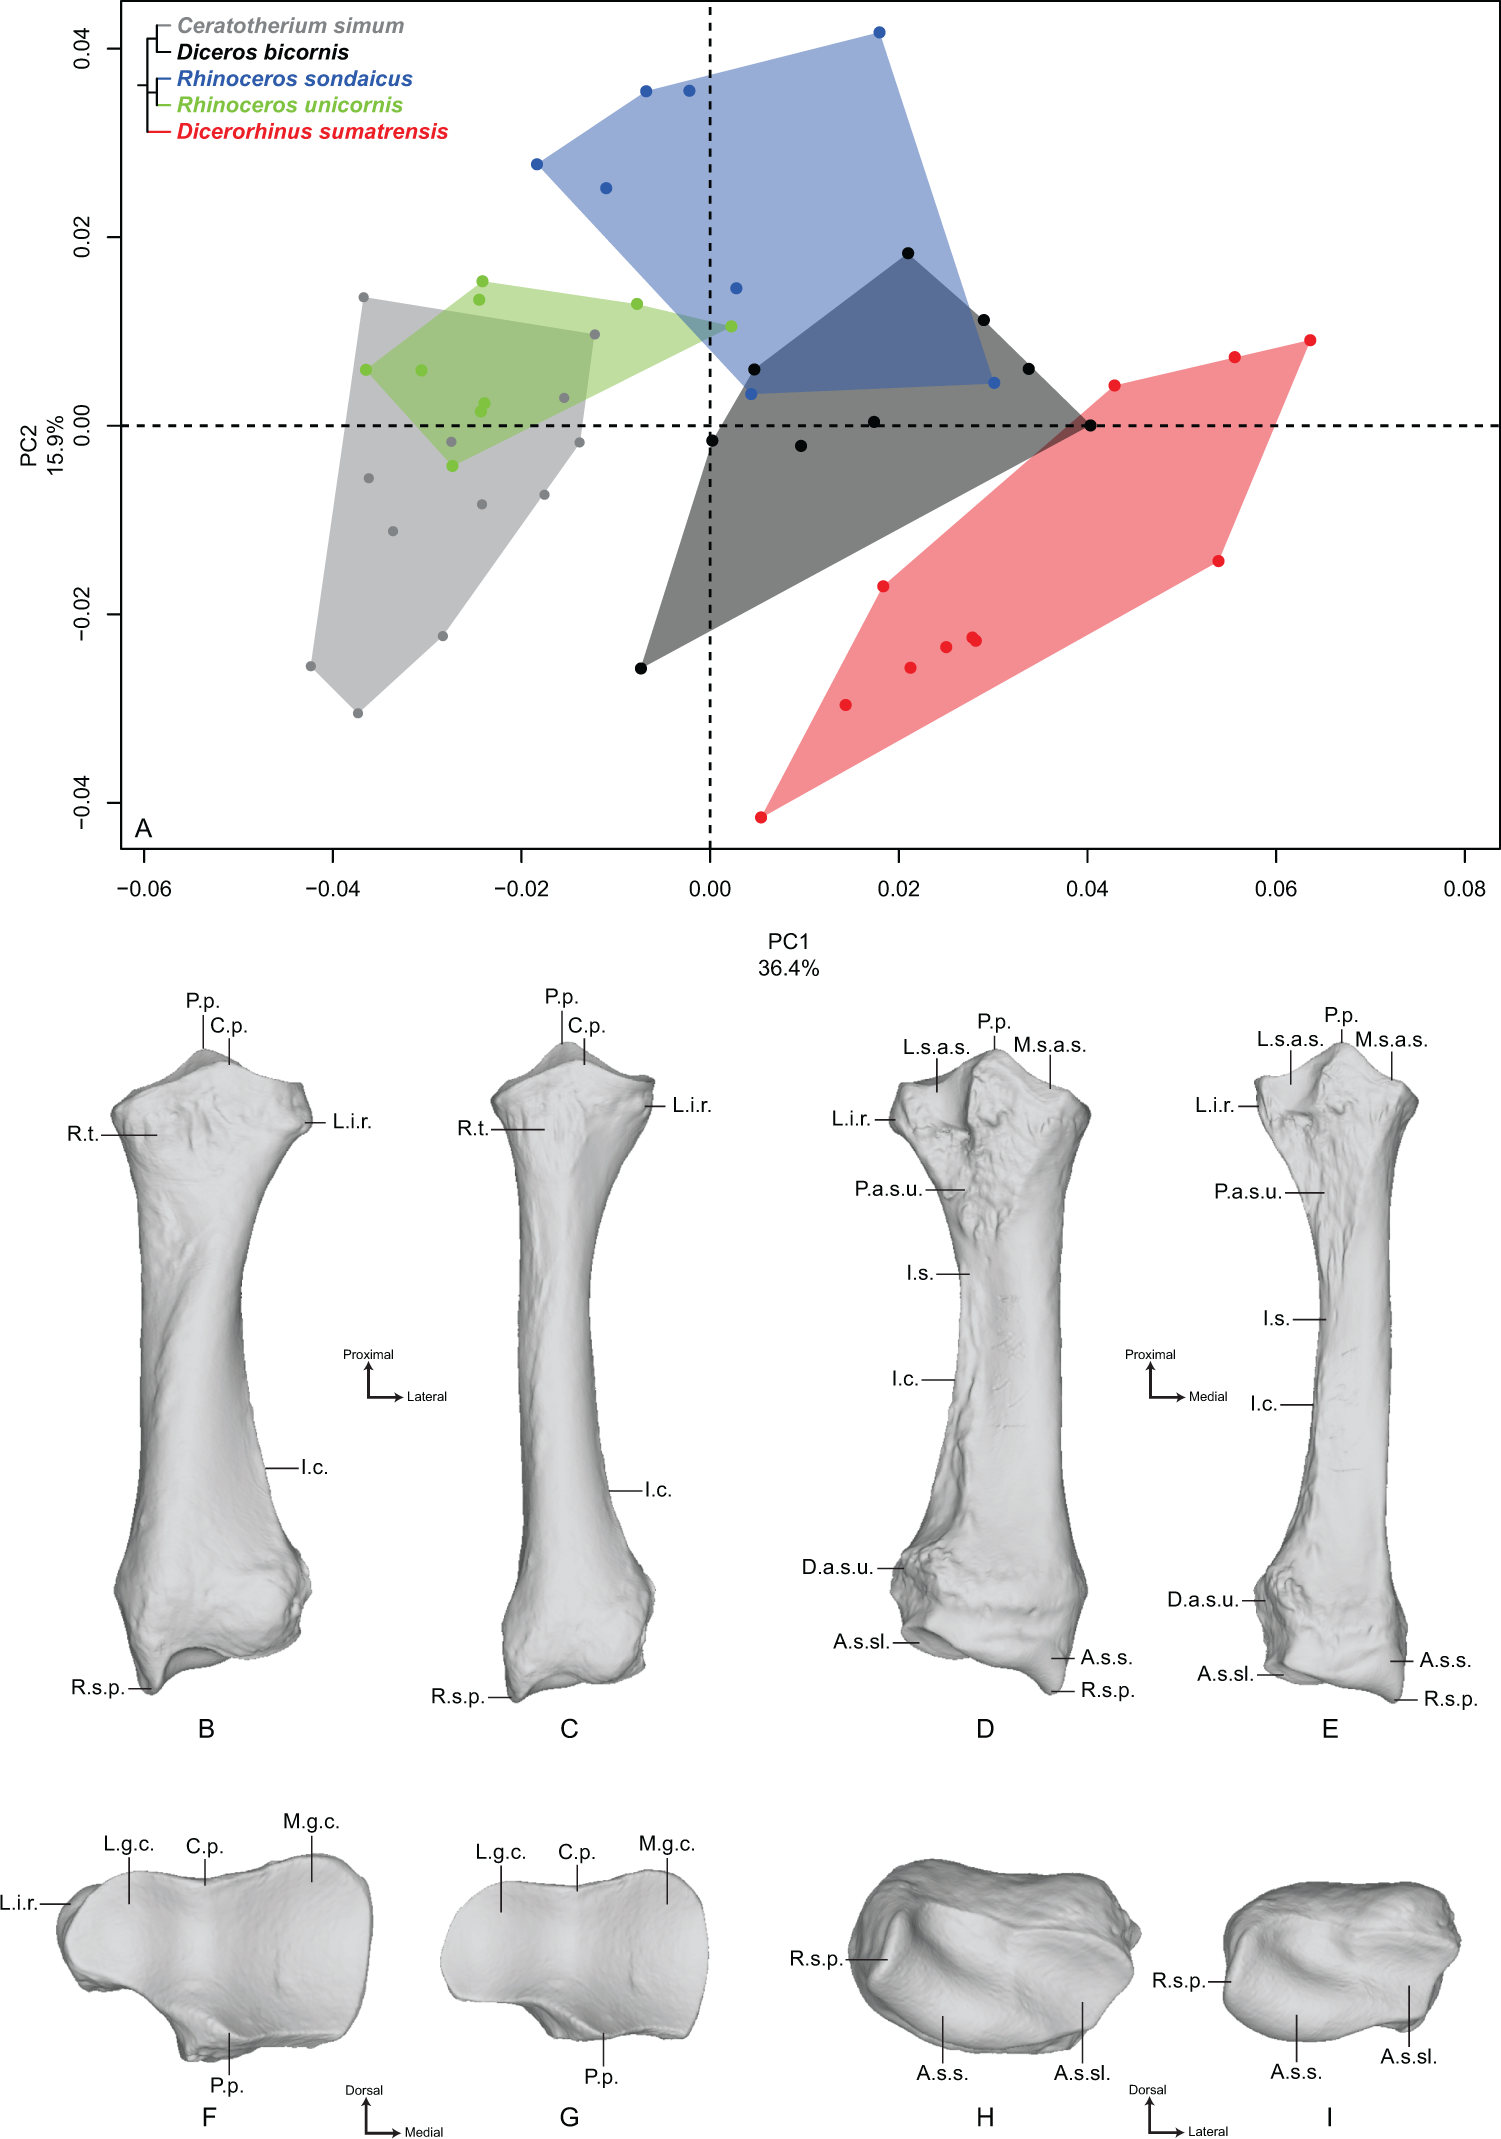 Interspecific variation in the limb long bones among modern 